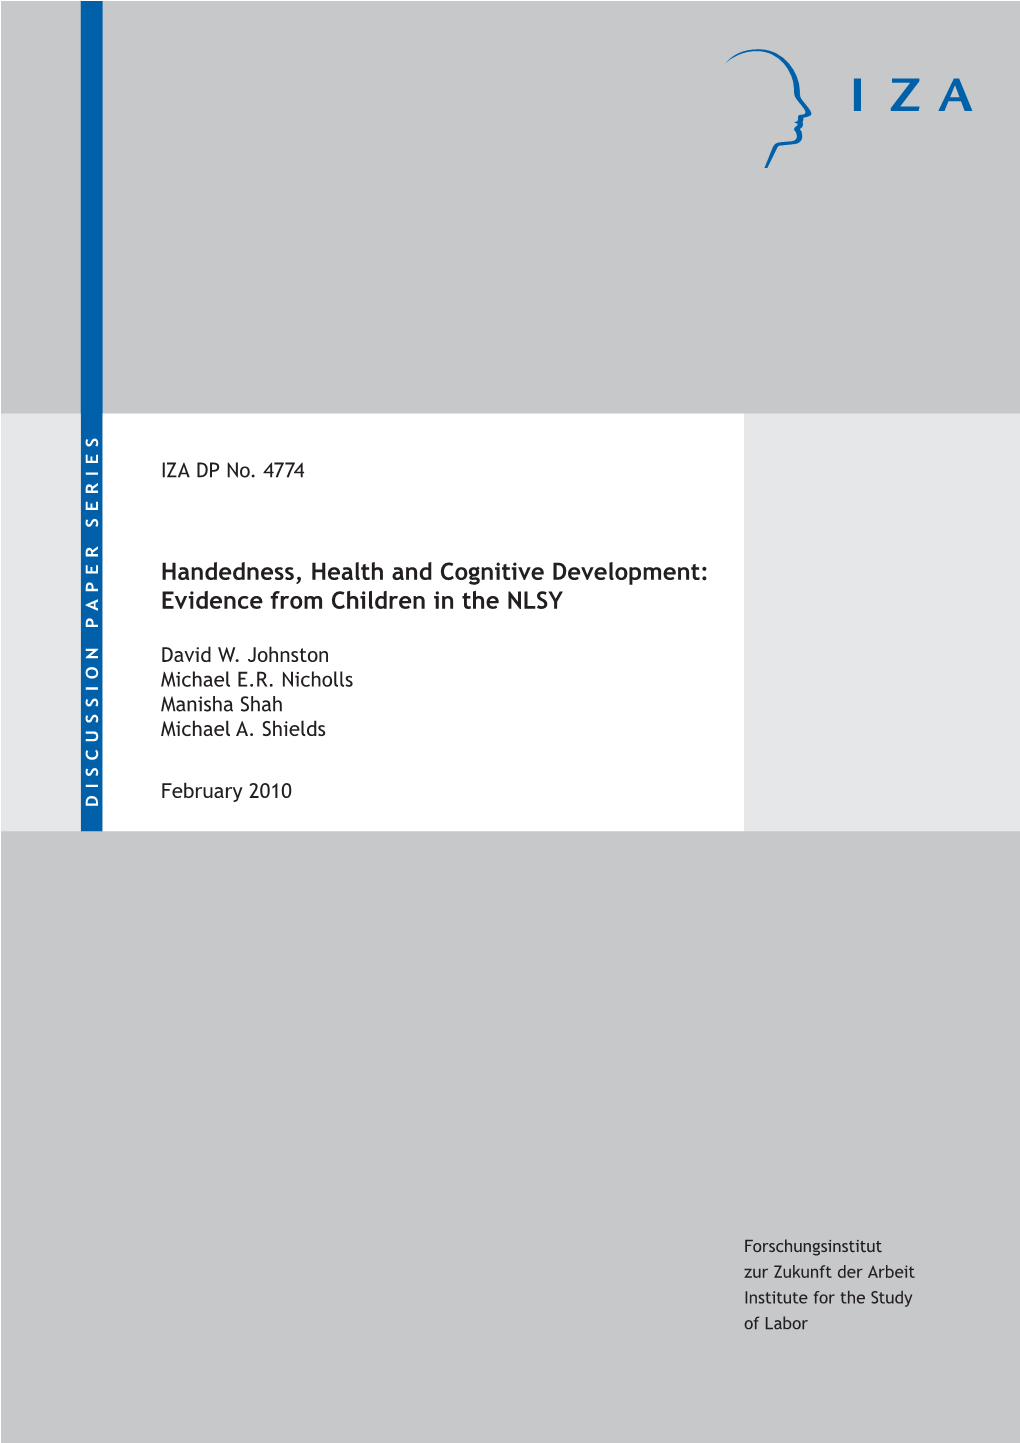 Handedness, Health and Cognitive Development: Evidence from Children in the NLSY